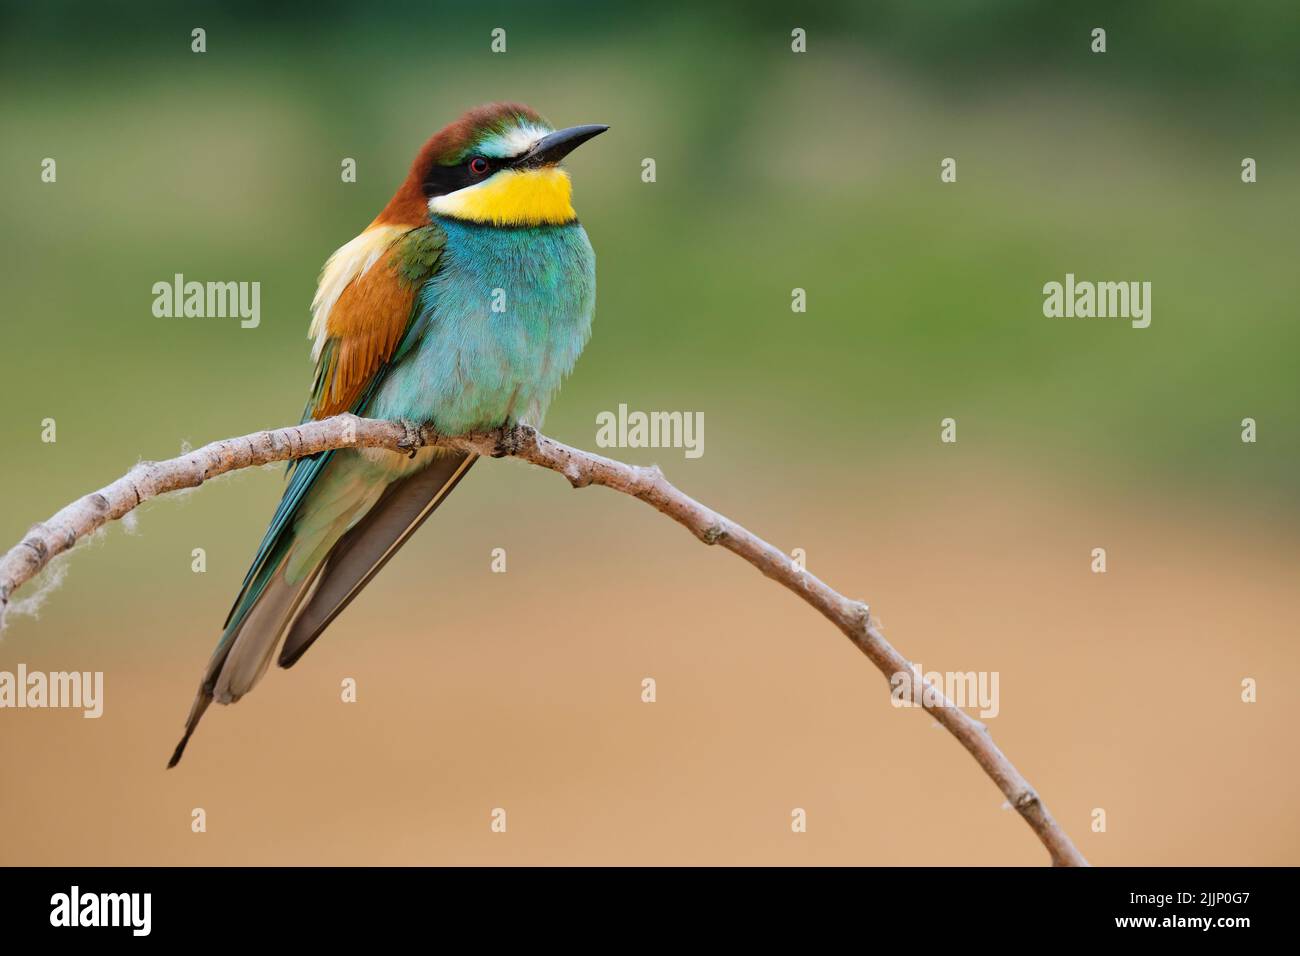 Colorful European bee eater bird with bright plumage sitting on thin twig in nature against blurred background on summer day Stock Photo